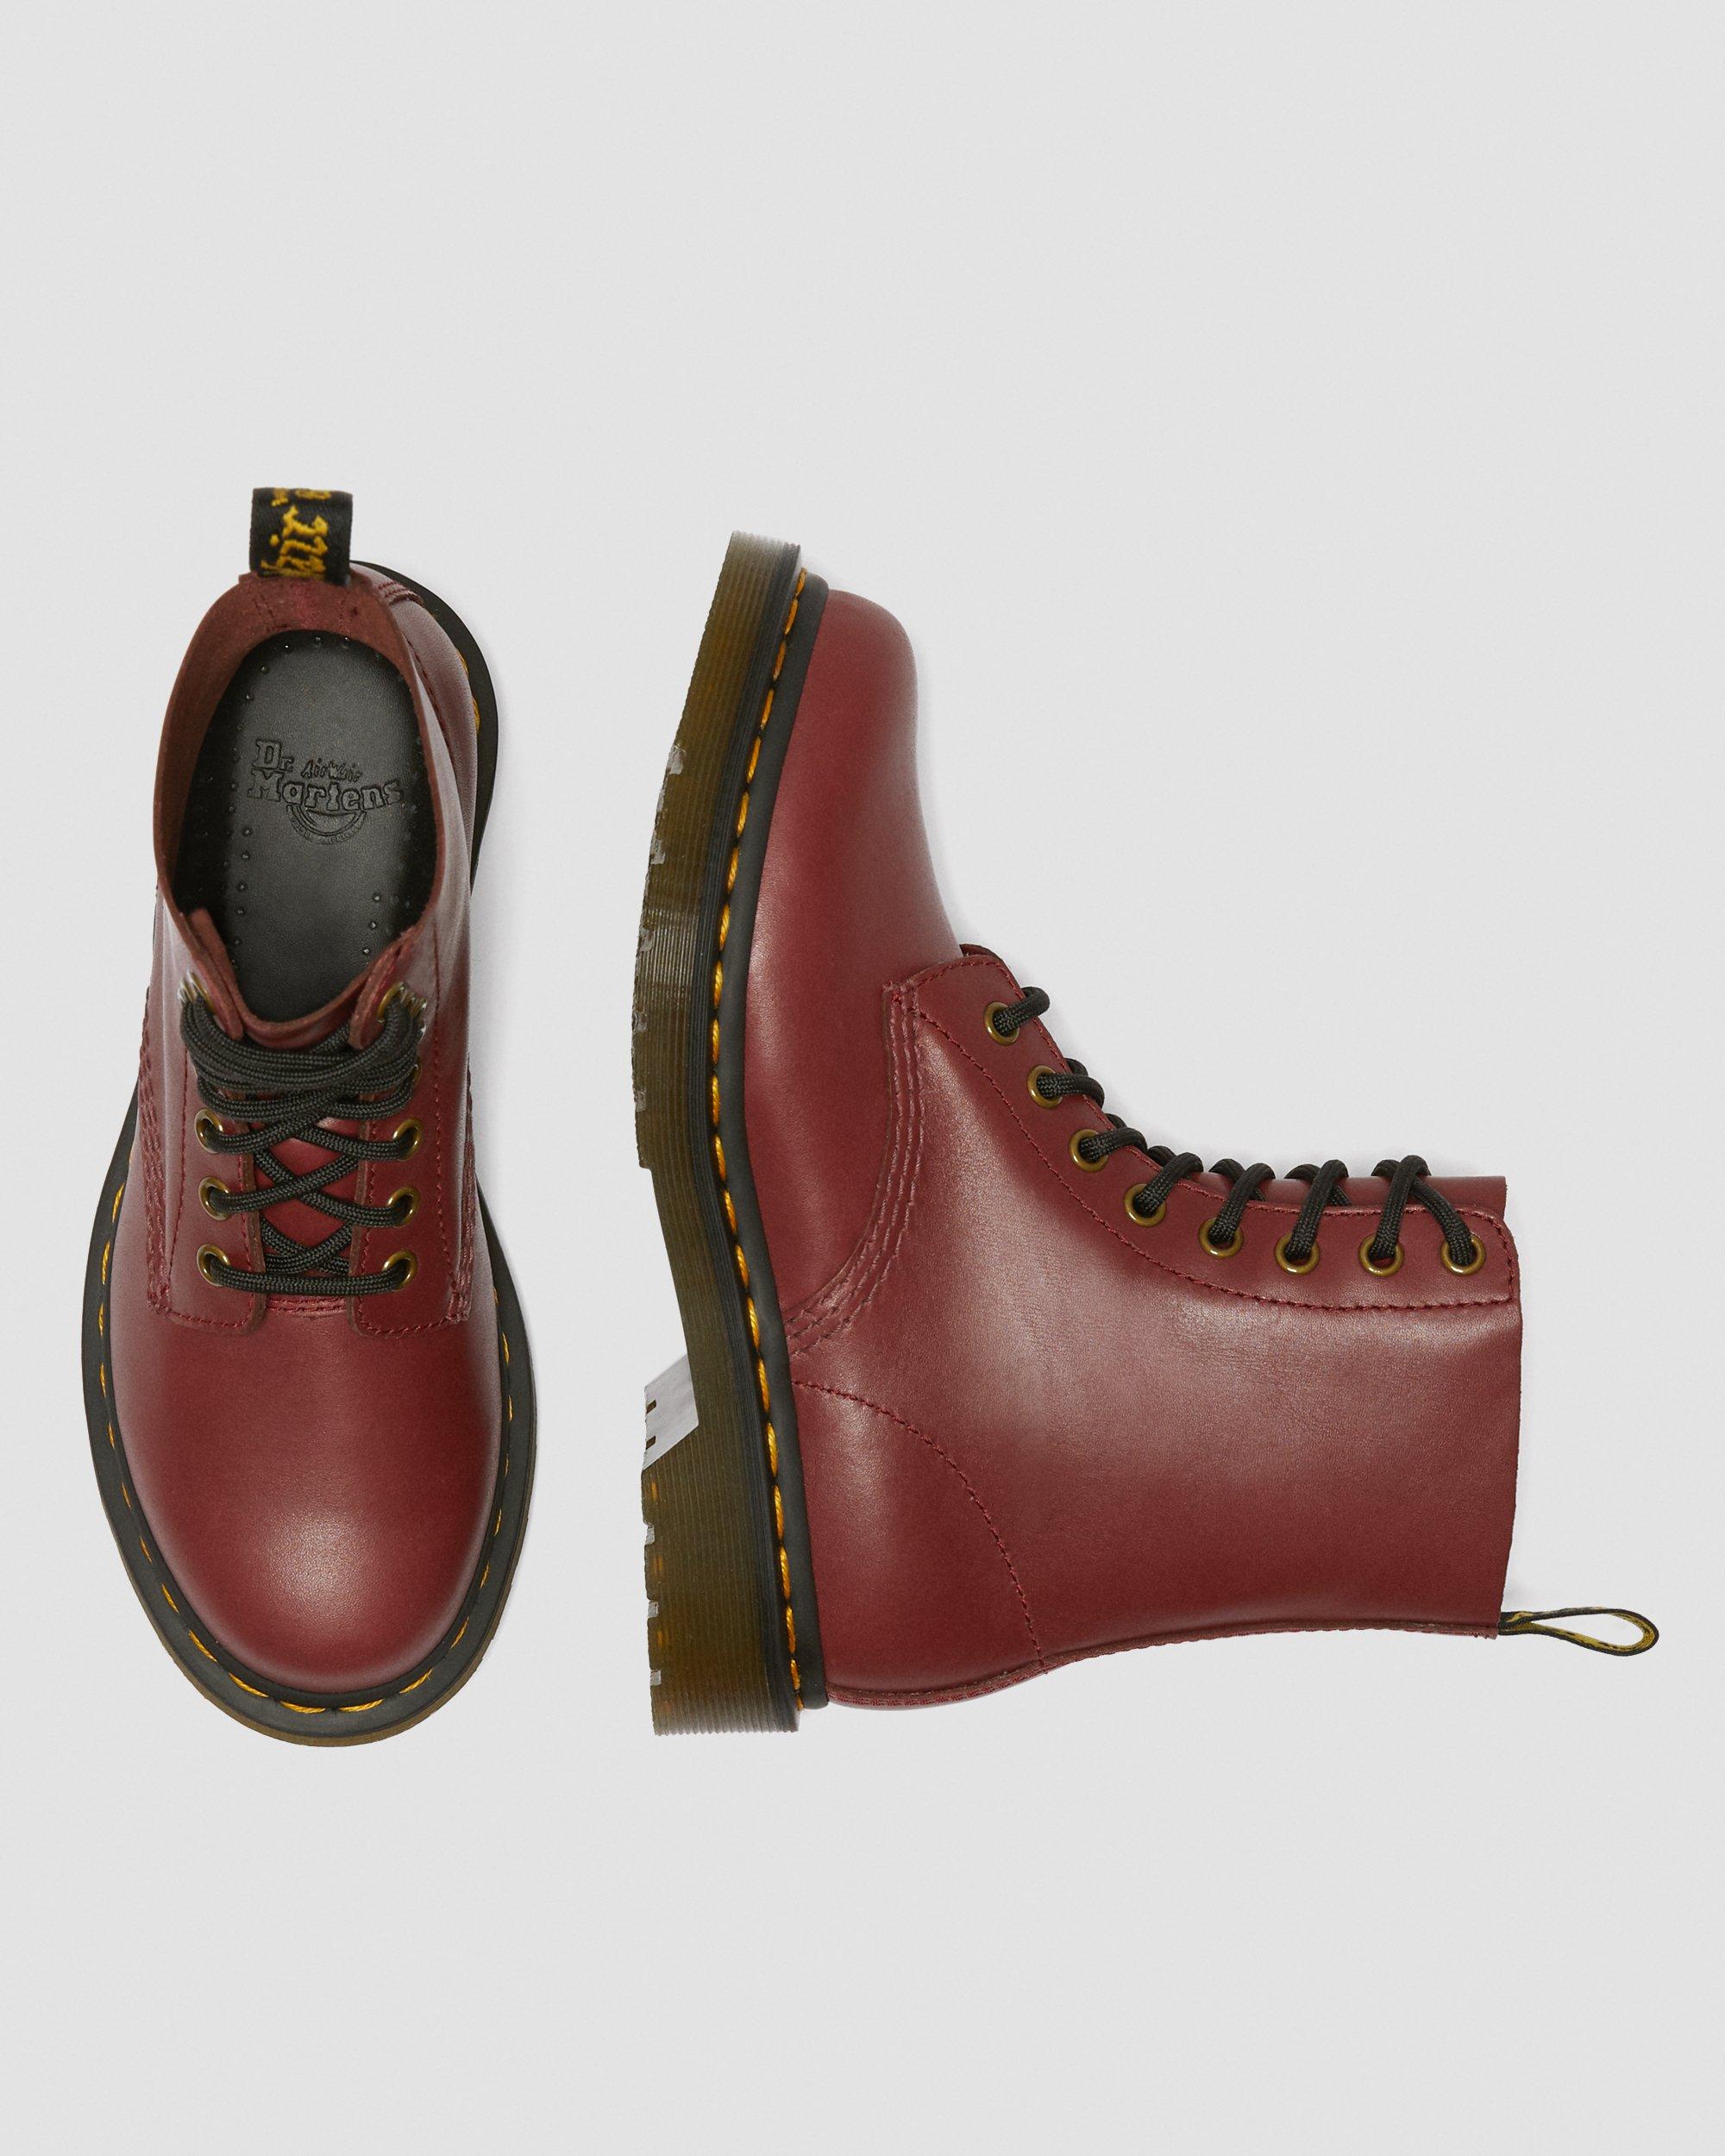 BOOTS 1460 PASCAL EN CUIR in Rouge Cherry Red